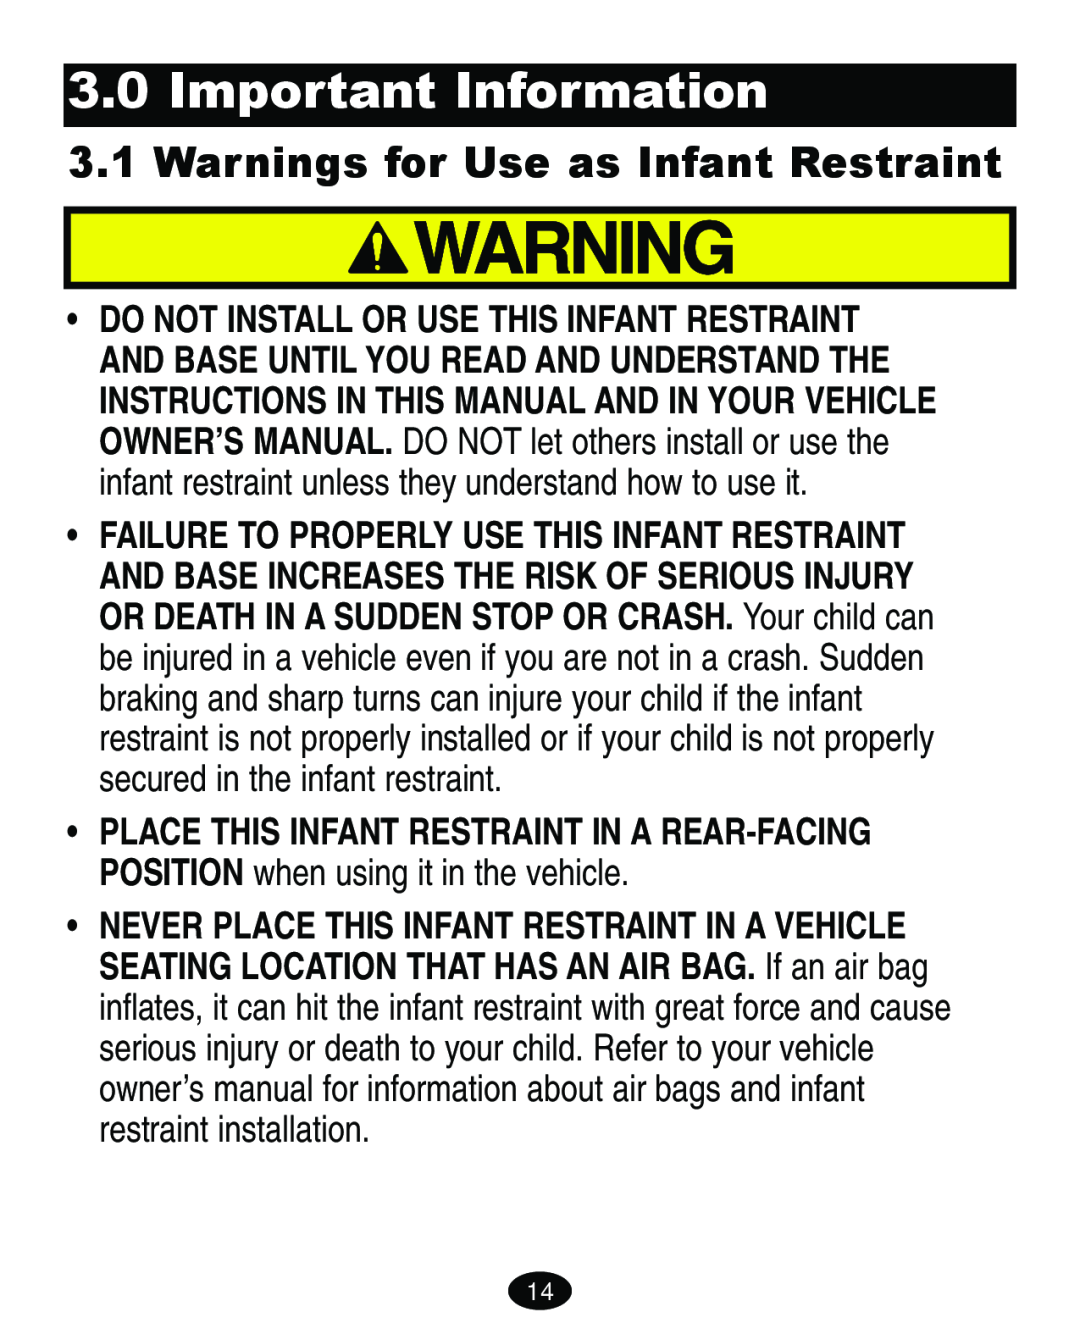 Graco 4460402 manual Important Information, Warnings for Use as Infant Restraint 